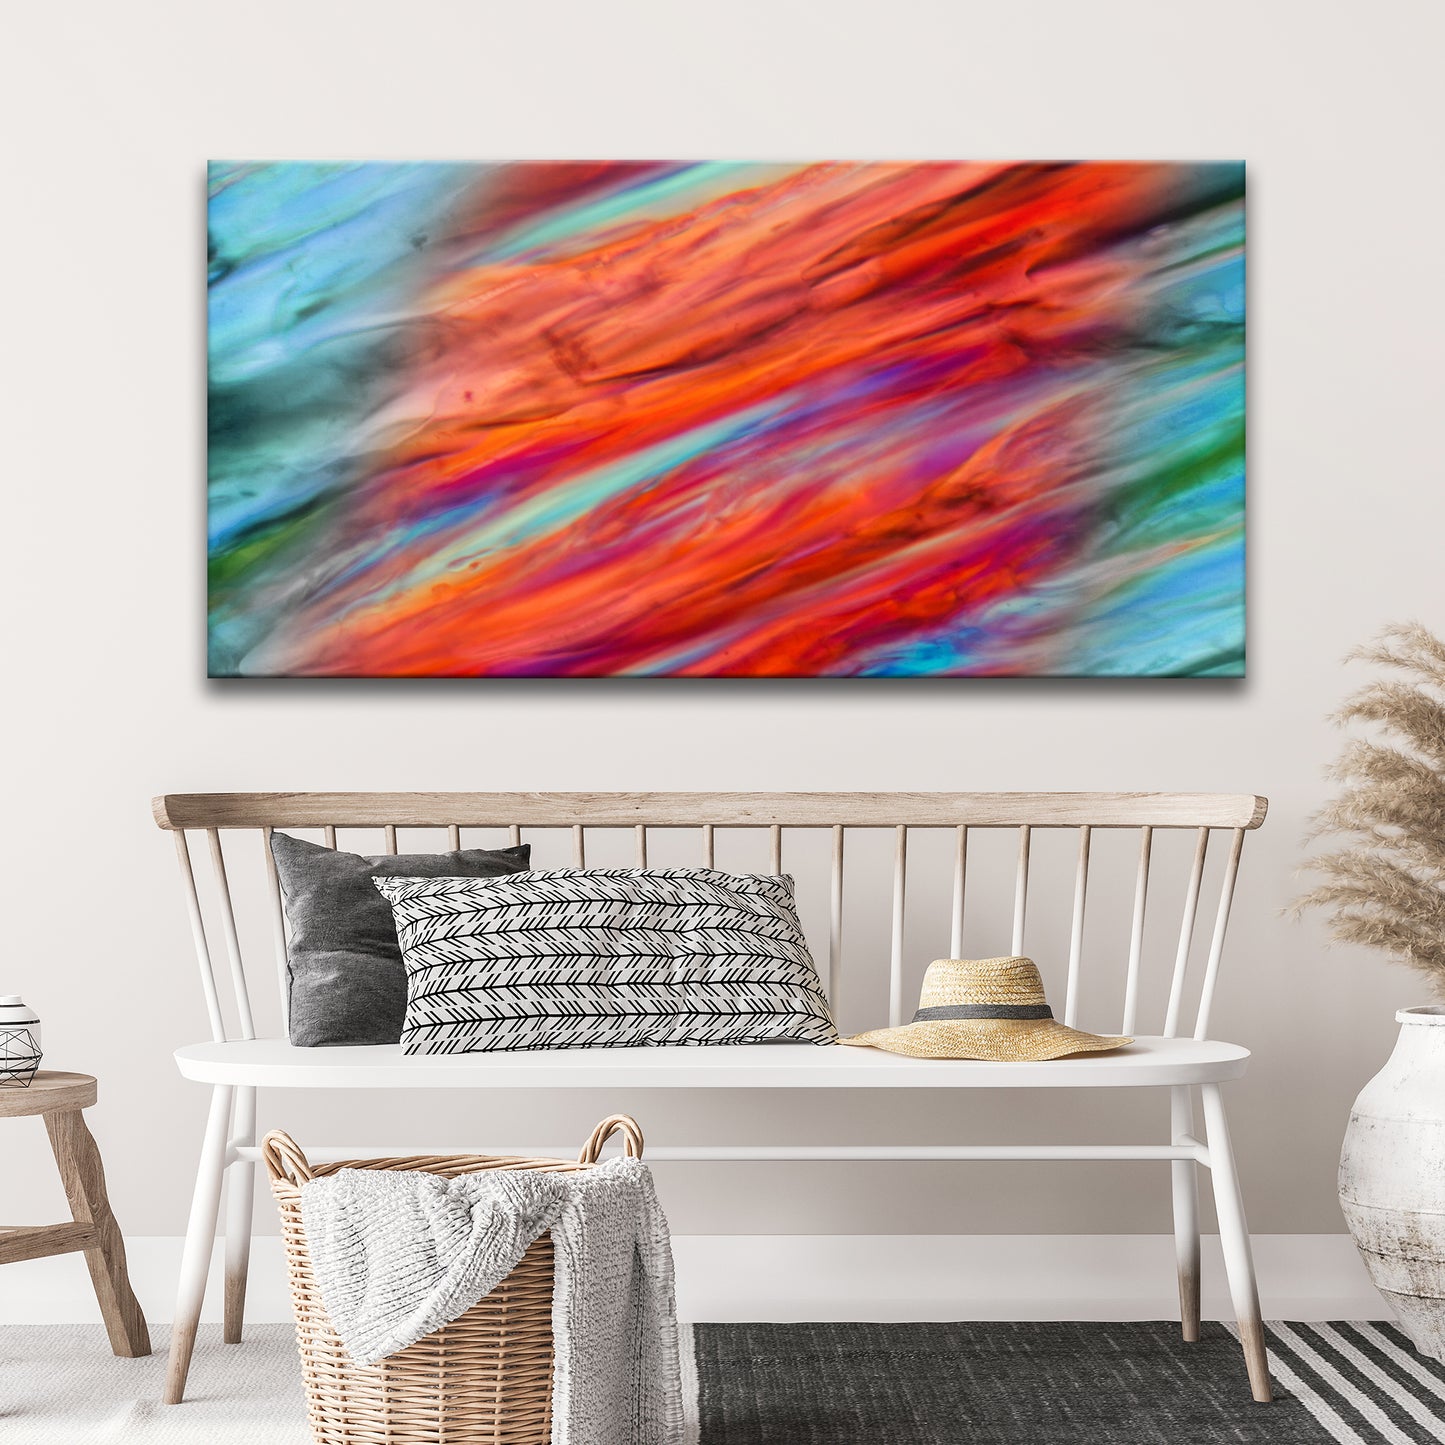 Teal And Orange Abstract Painting Canvas Wall Art  - Image by Tailored Canvases